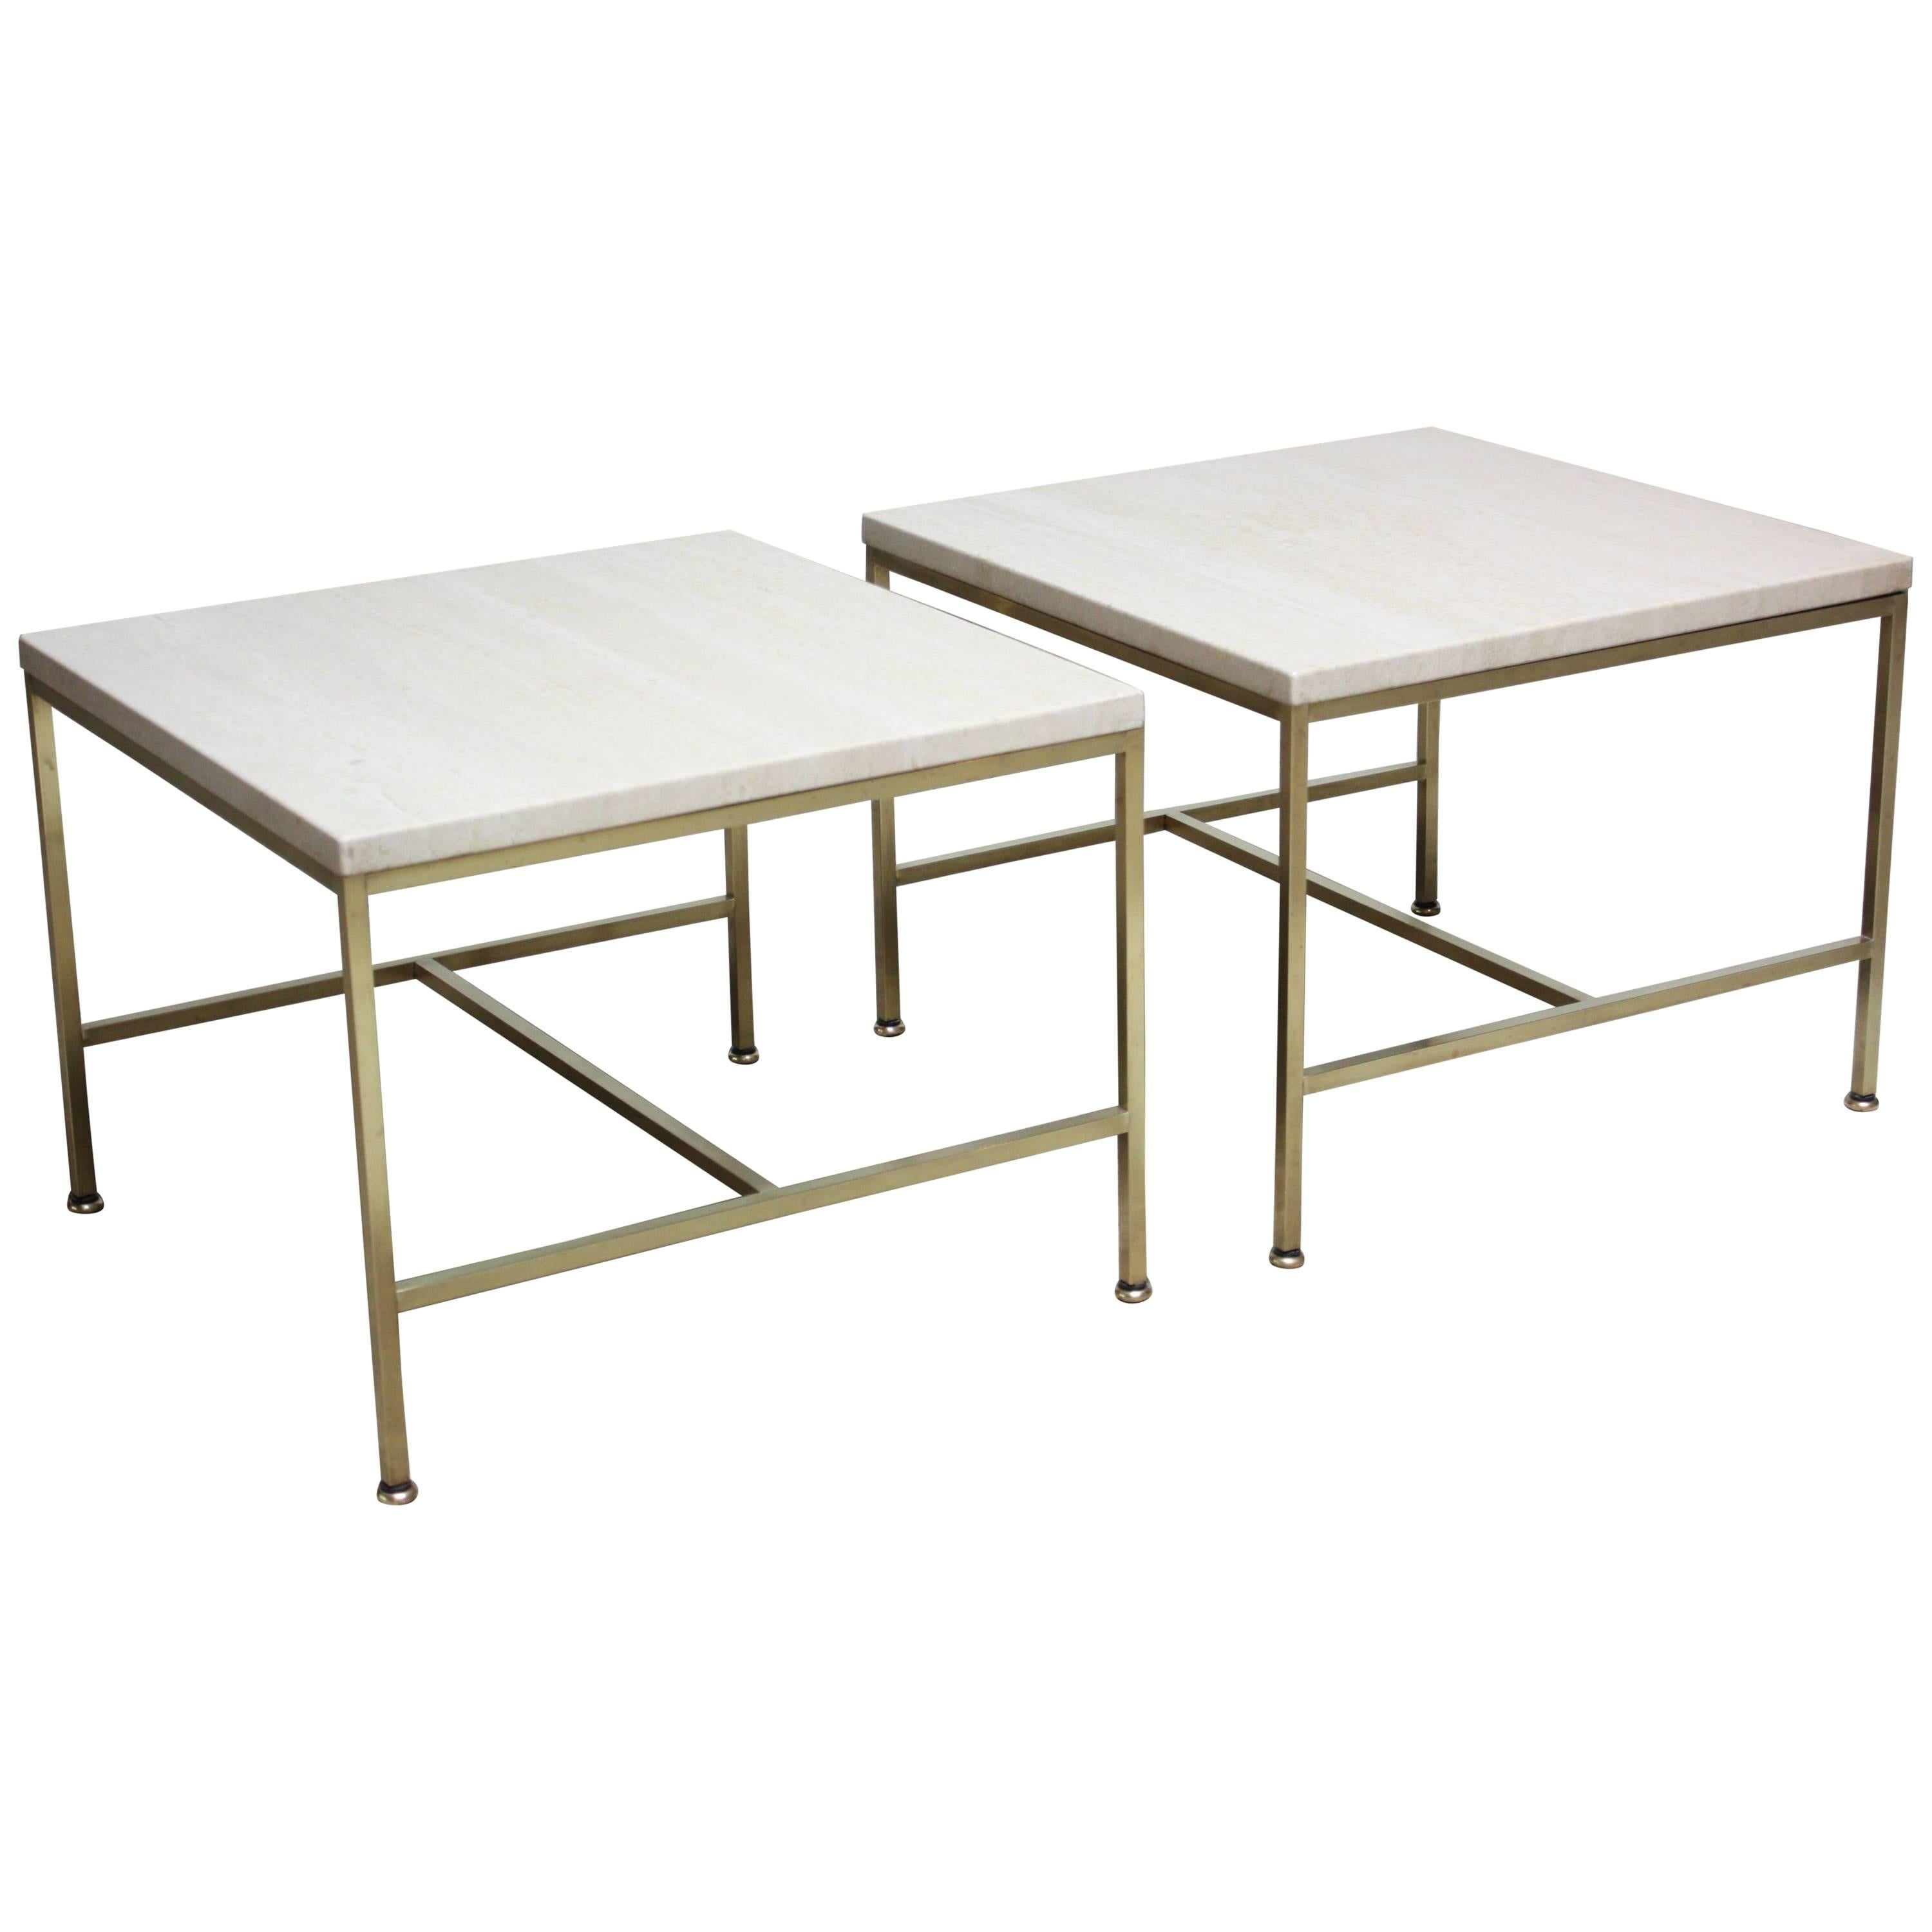 Paul McCobb Travertine and Brass Occasional Tables